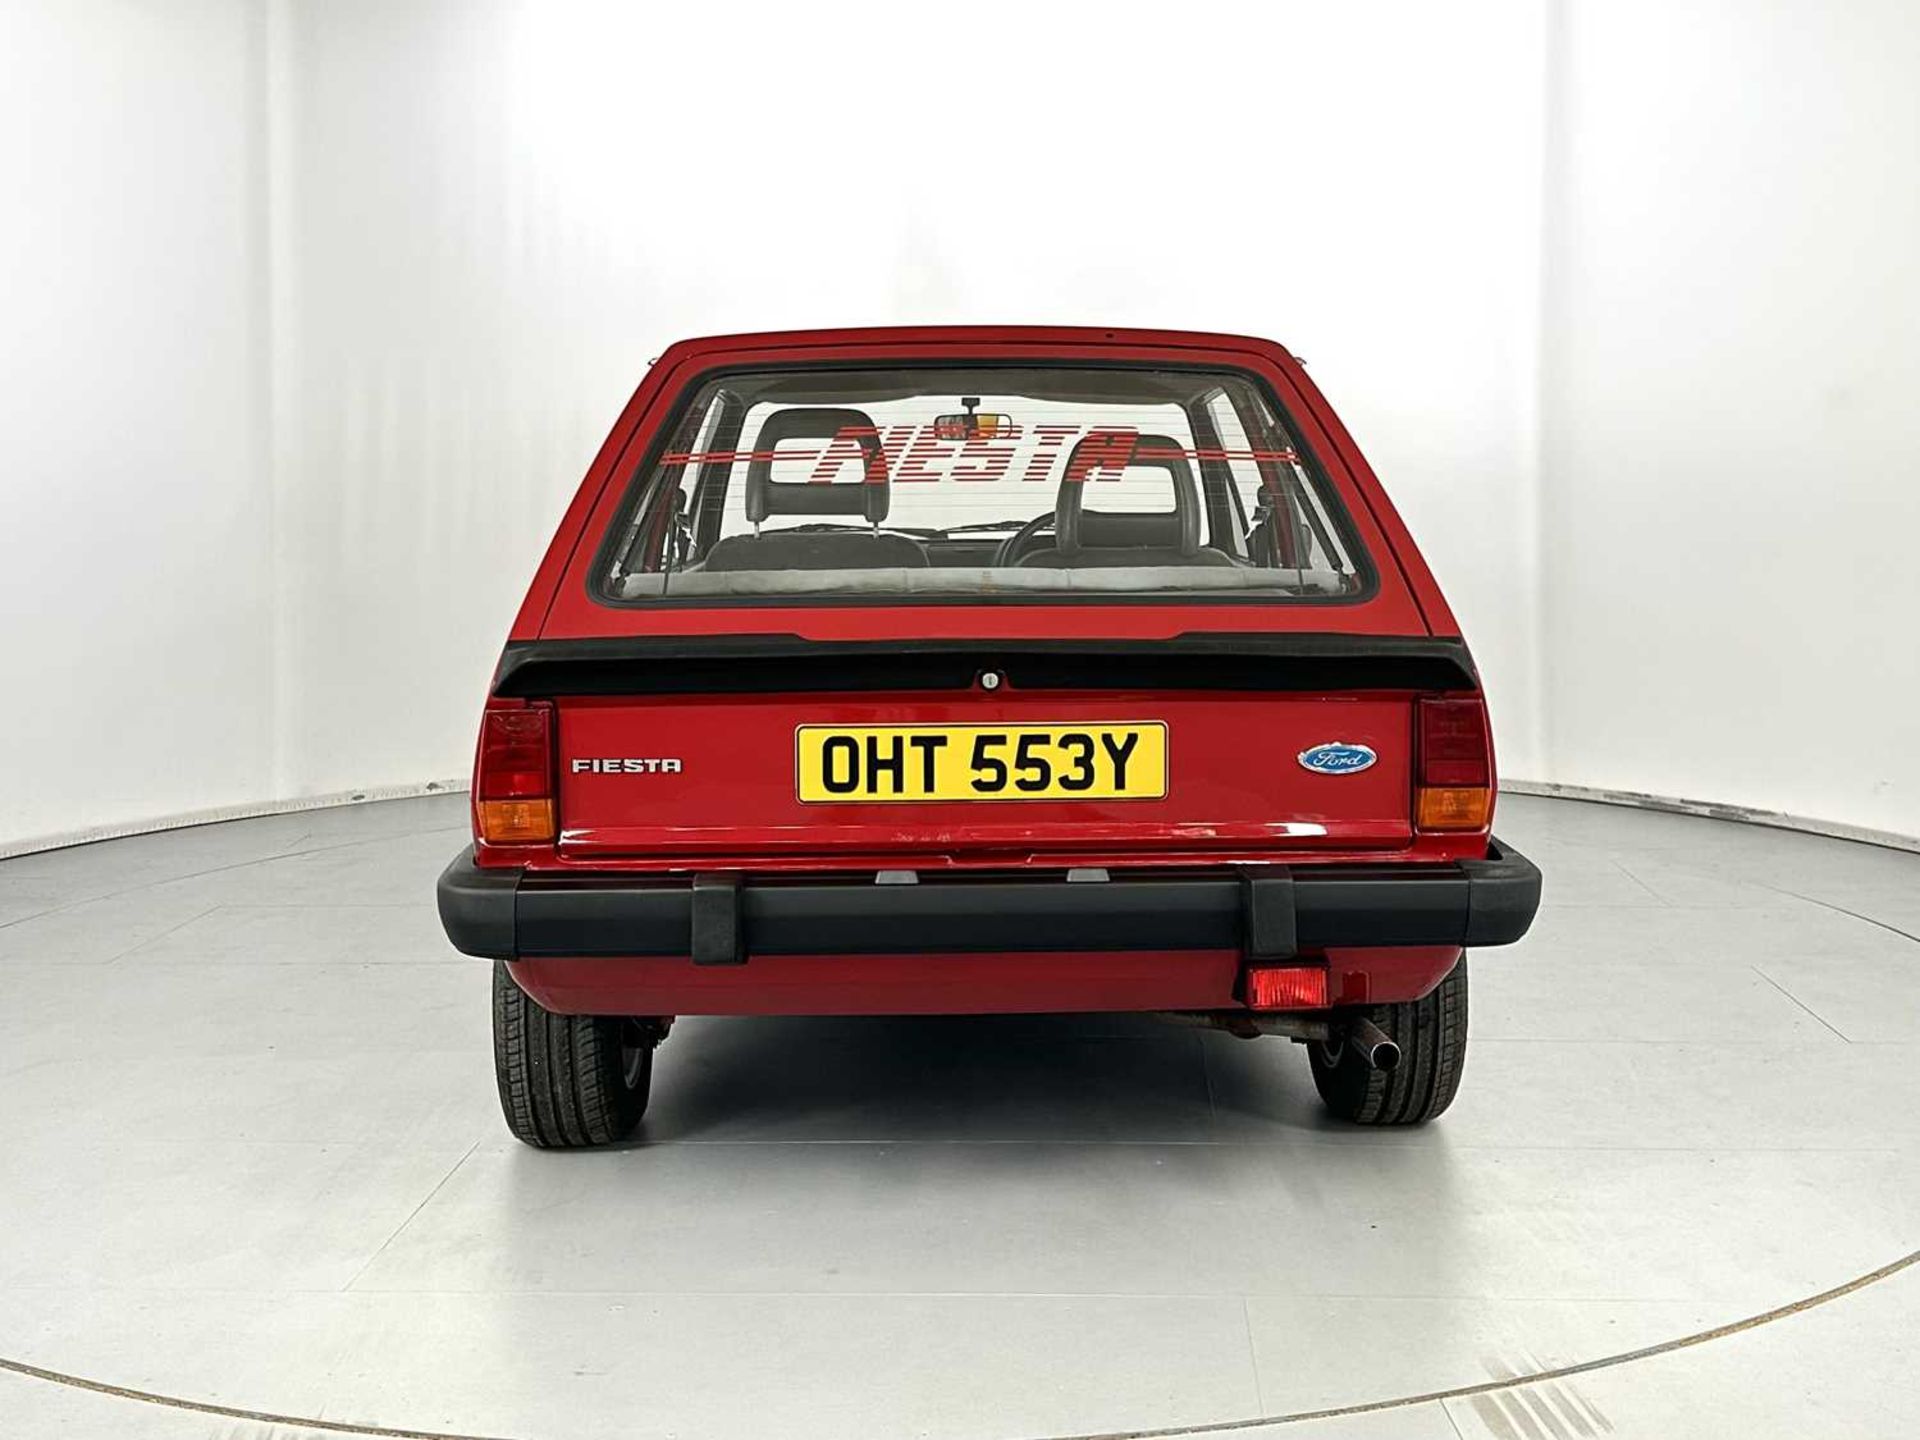 1983 Ford Fiesta - Image 8 of 31